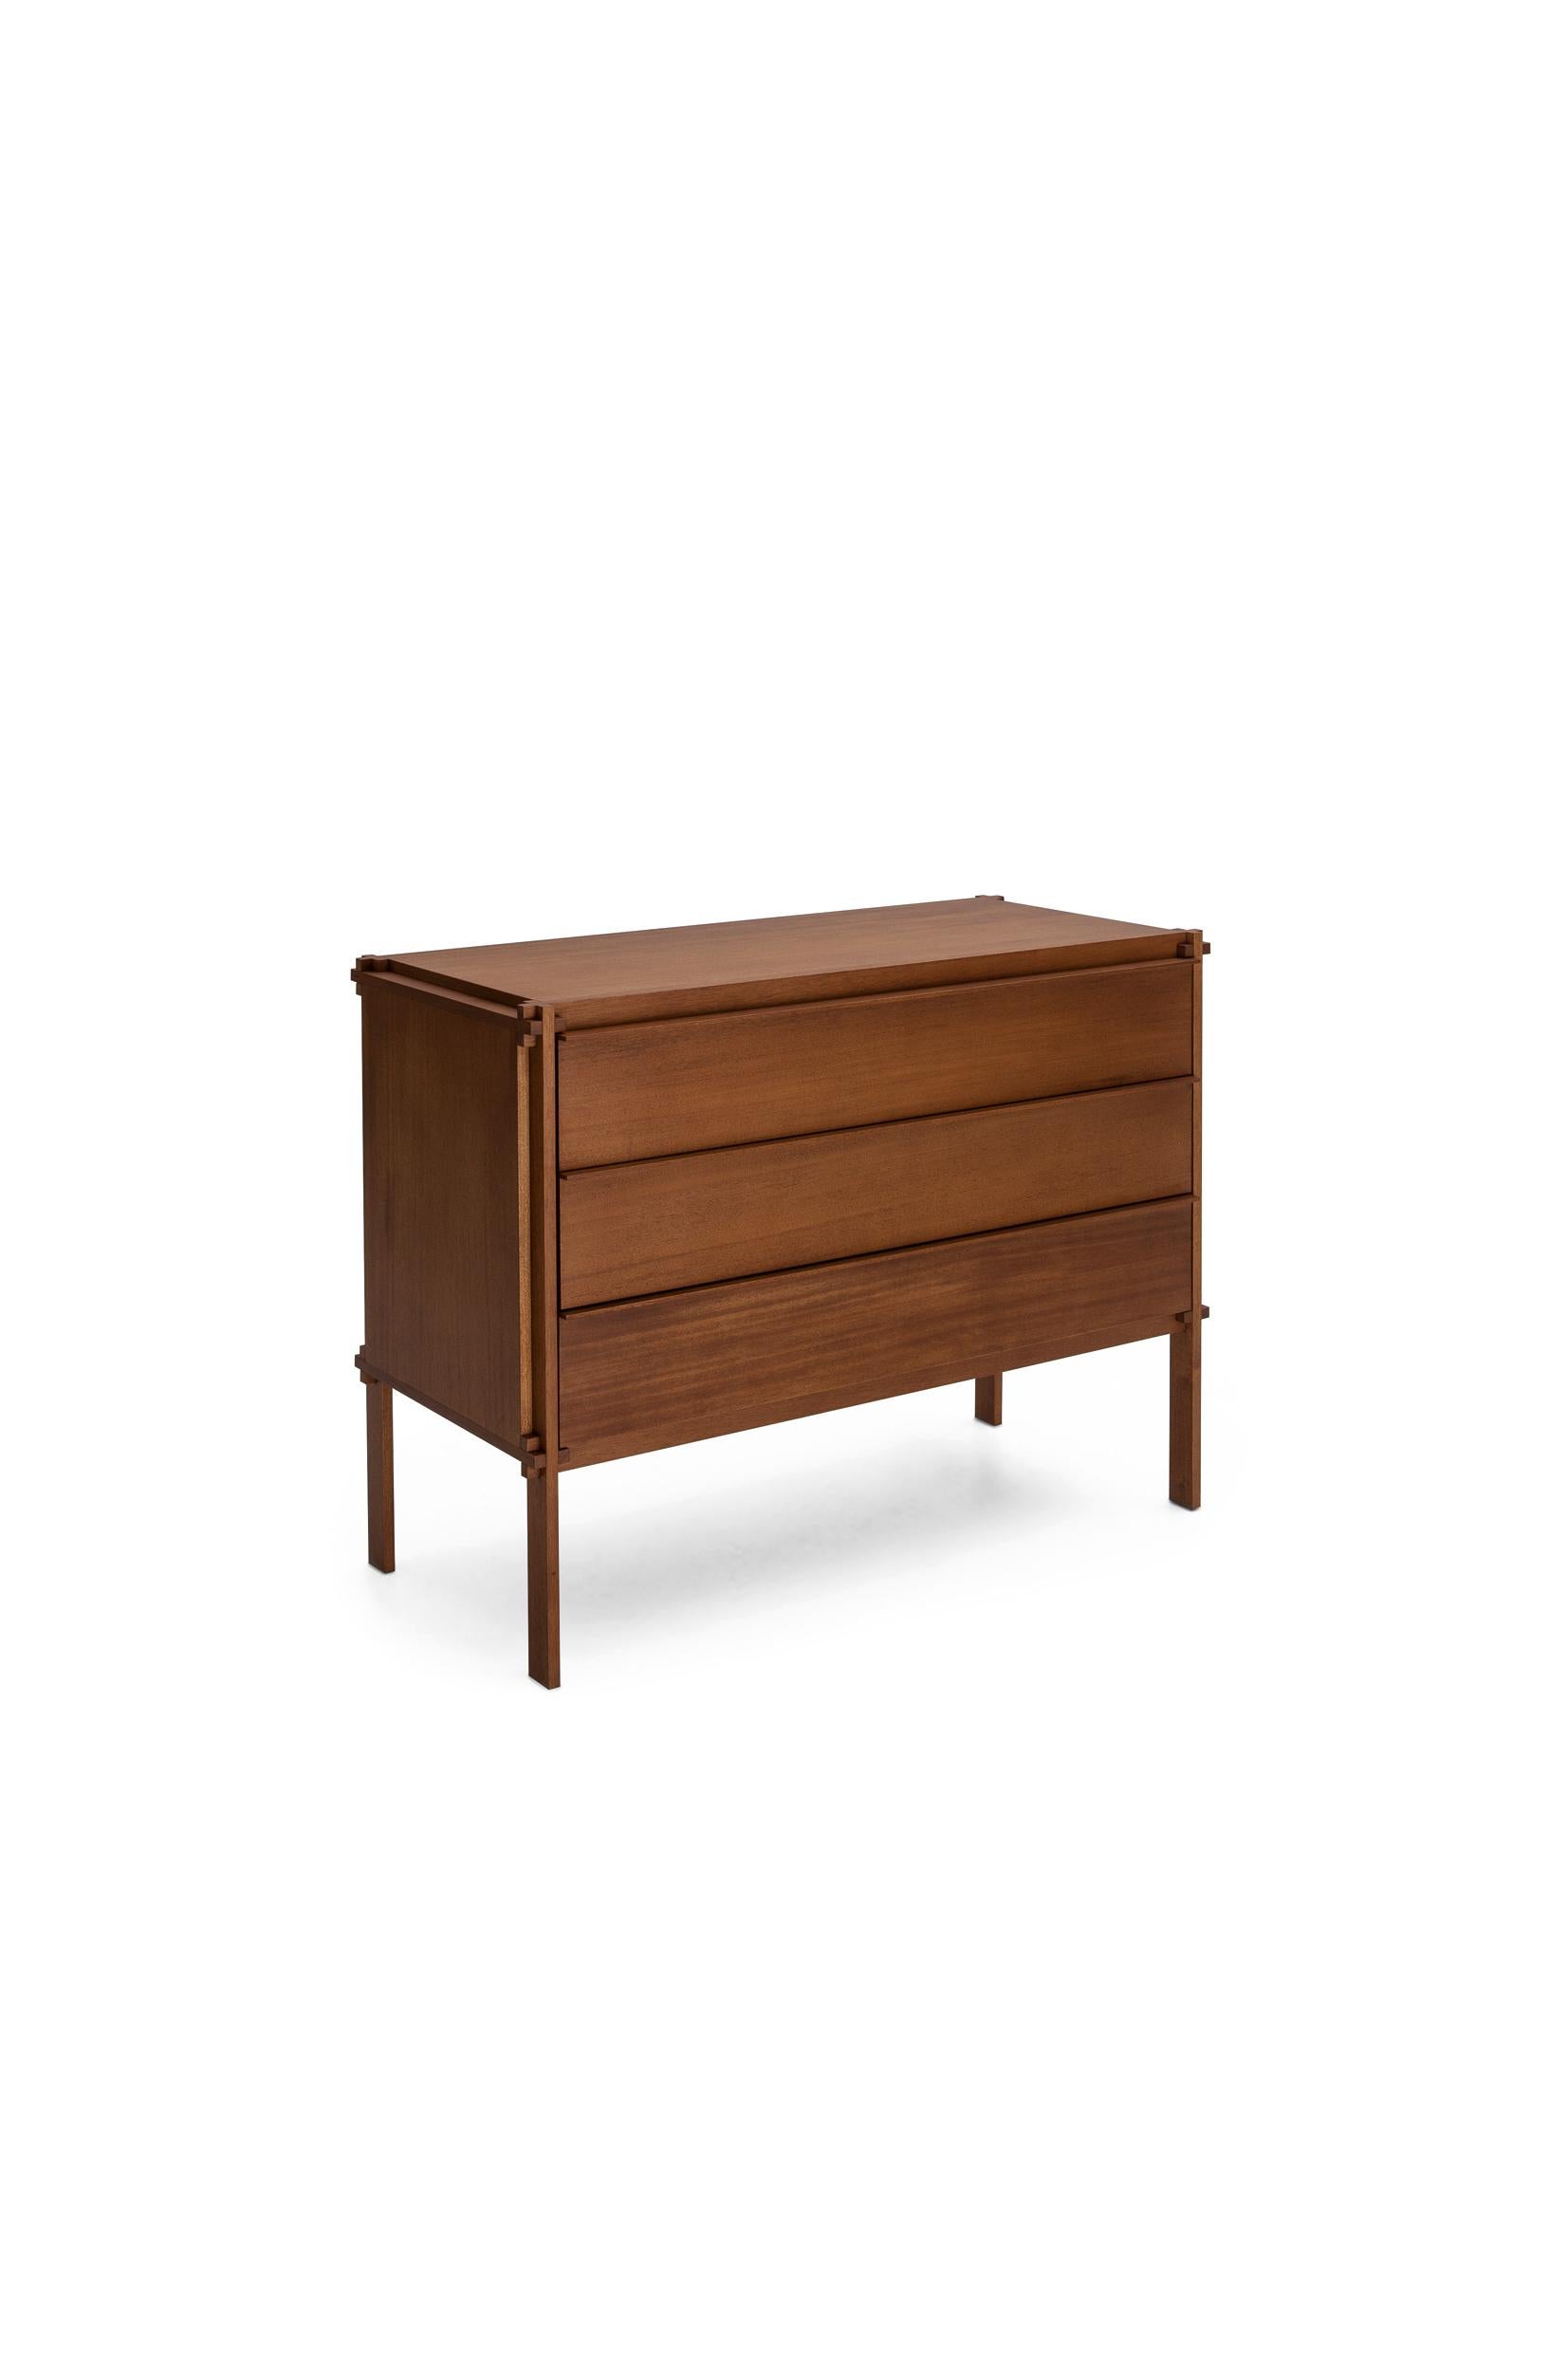 MHC.1 Chest of Drawers by Werner Blaser. Expert-crafted in Italy exclusively by Molteni&C. 

A pioneering piece, this was Molteni&C's first modern furniture design. Redefining the image of Italian furniture, the hallmark of this award-winning piece